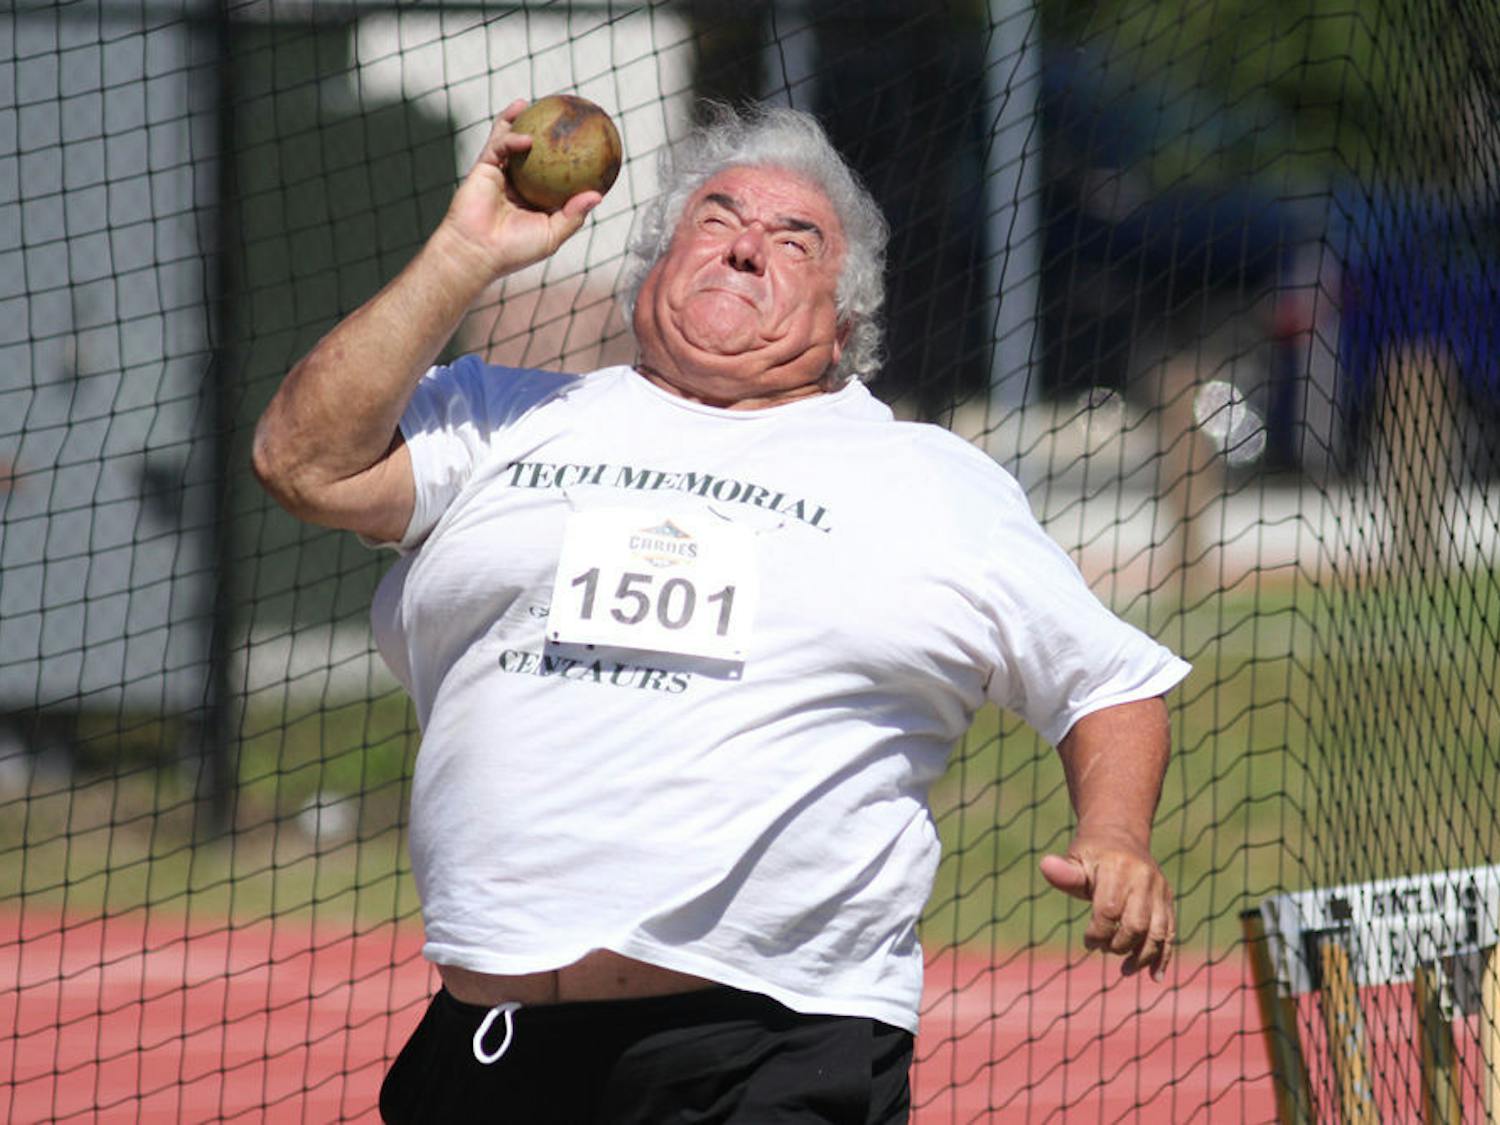 Joe Abal, 65, competes in the shot put competition at the 14th Annual Gainesville Senior Games on Sunday. Abal came in second place in his age category, 65 to 70, with a throw of 24 feet and 1 inch.